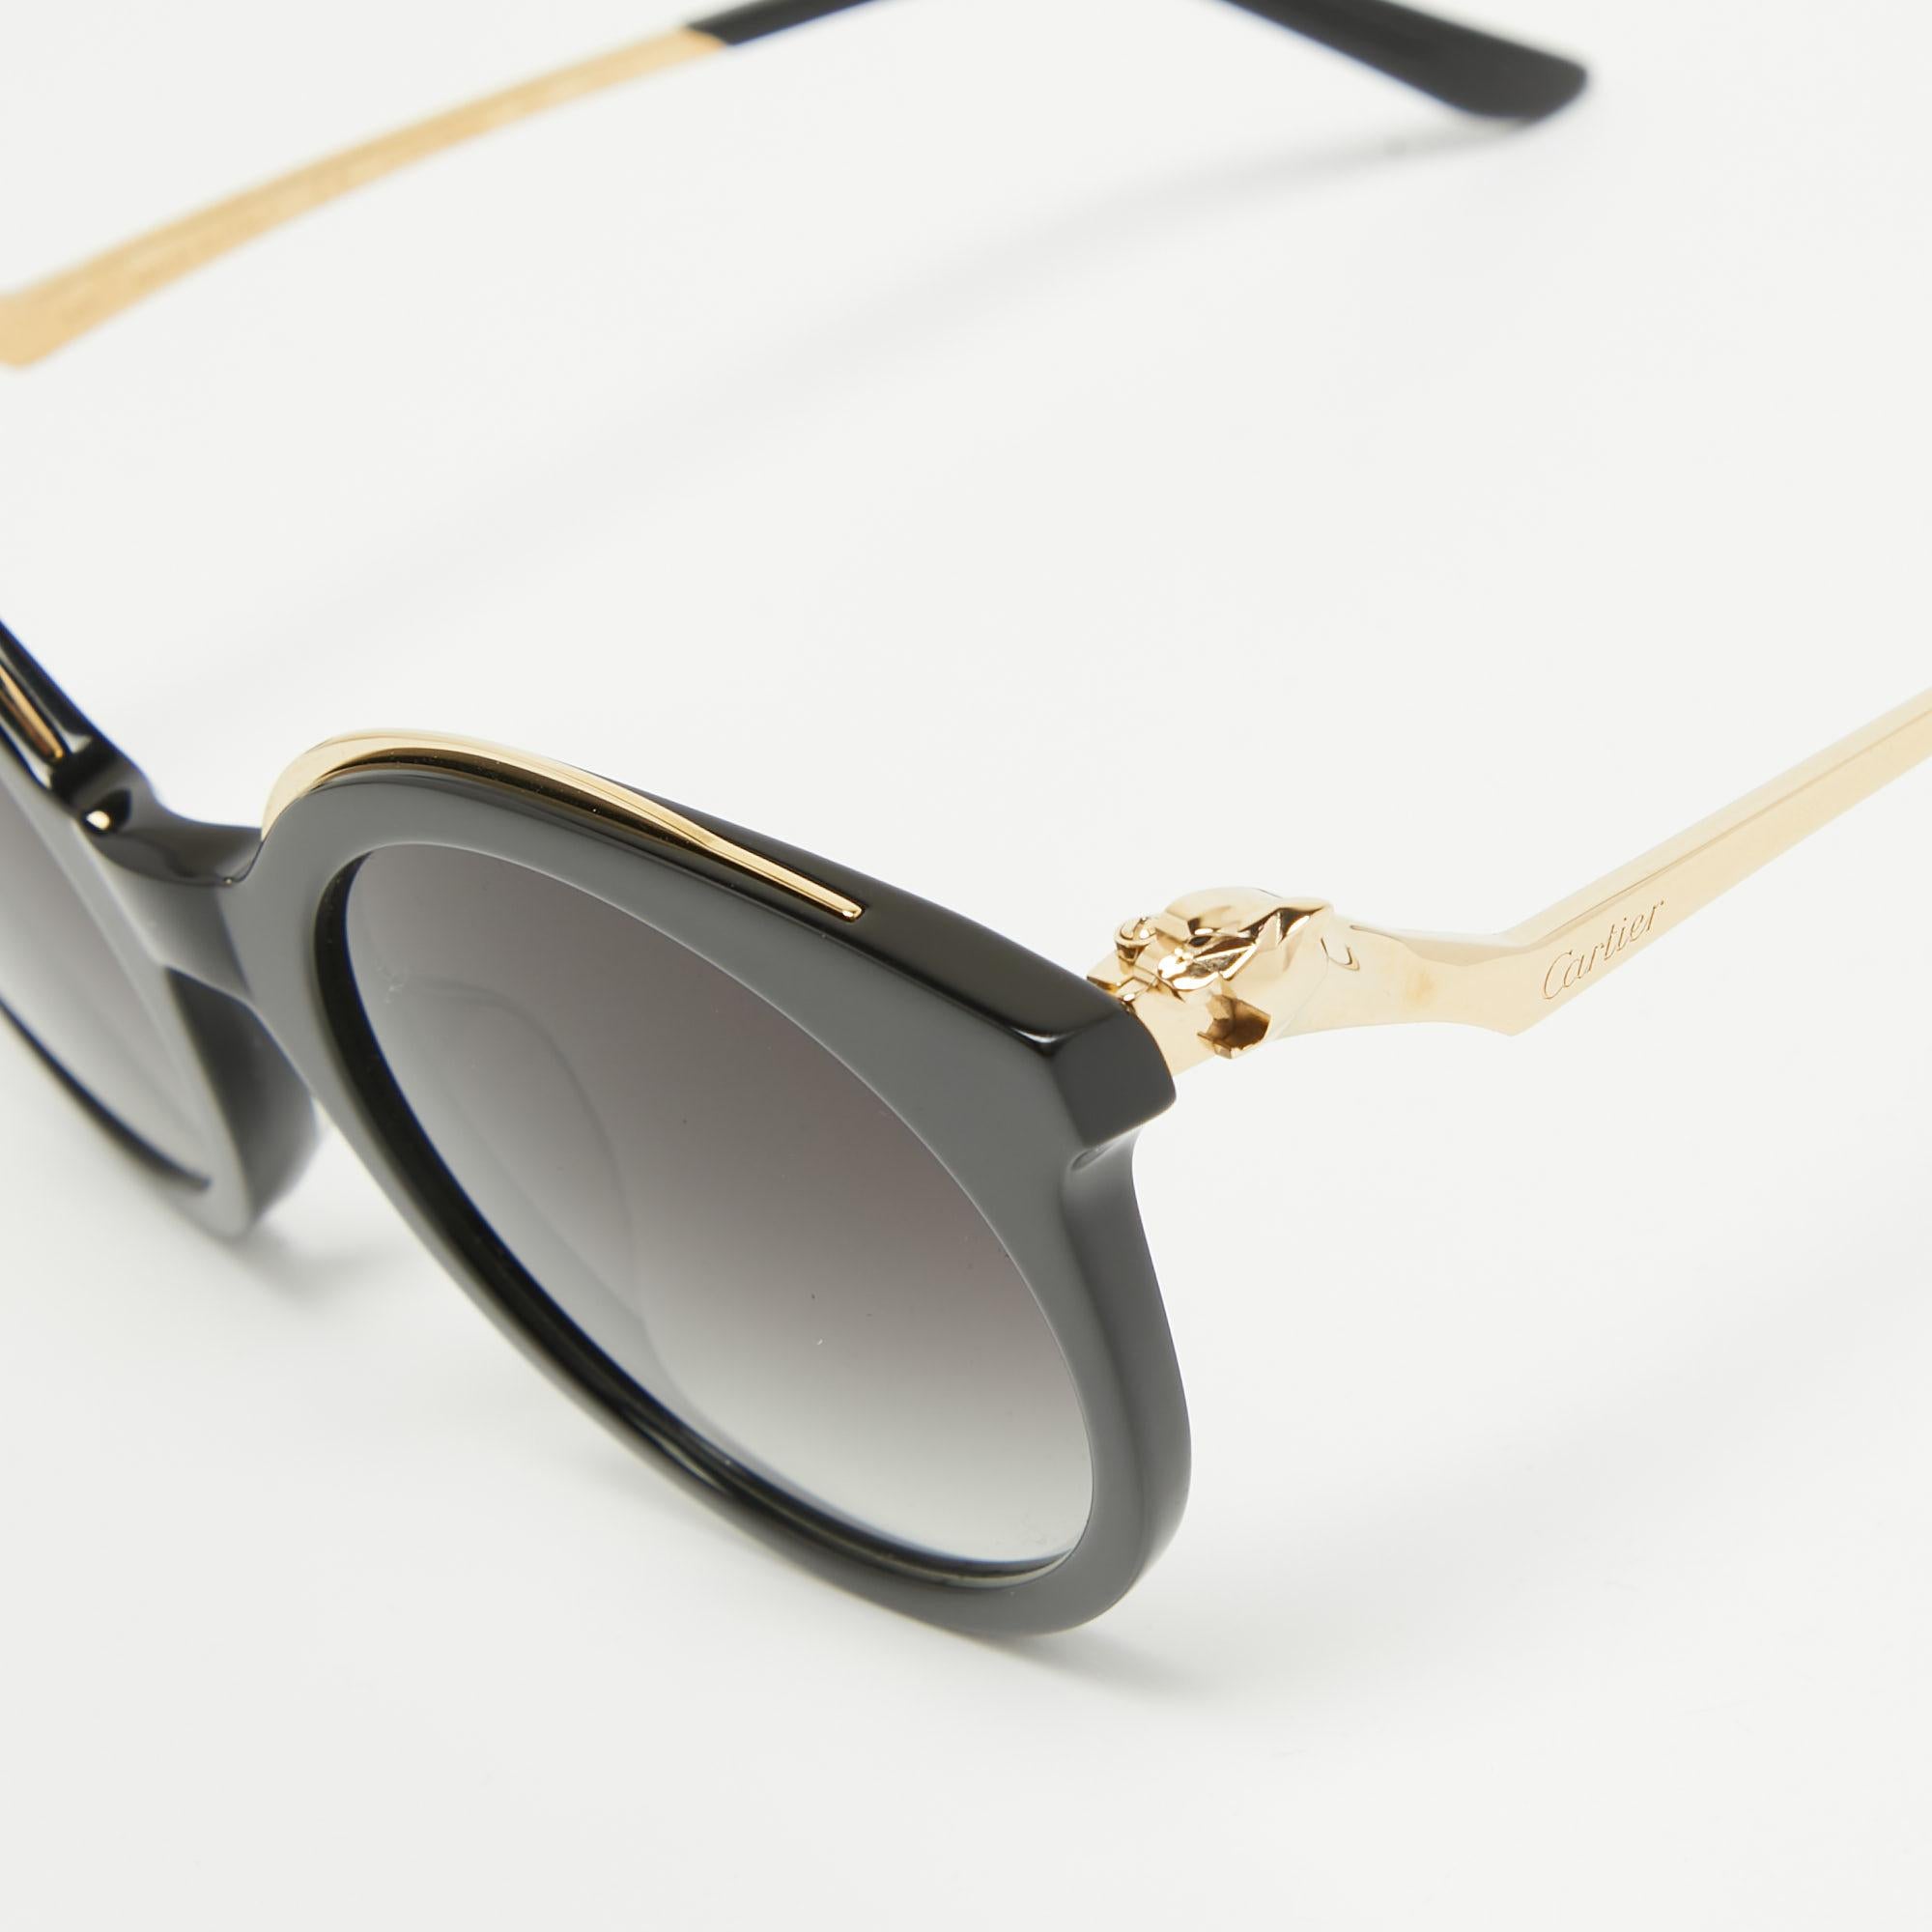 The Cartier sunglasses exude timeless charm and contemporary allure. Crafted with meticulous attention to detail, they feature sleek black frames with gradient lenses, offering both style and functionality. A perfect accessory for those seeking a